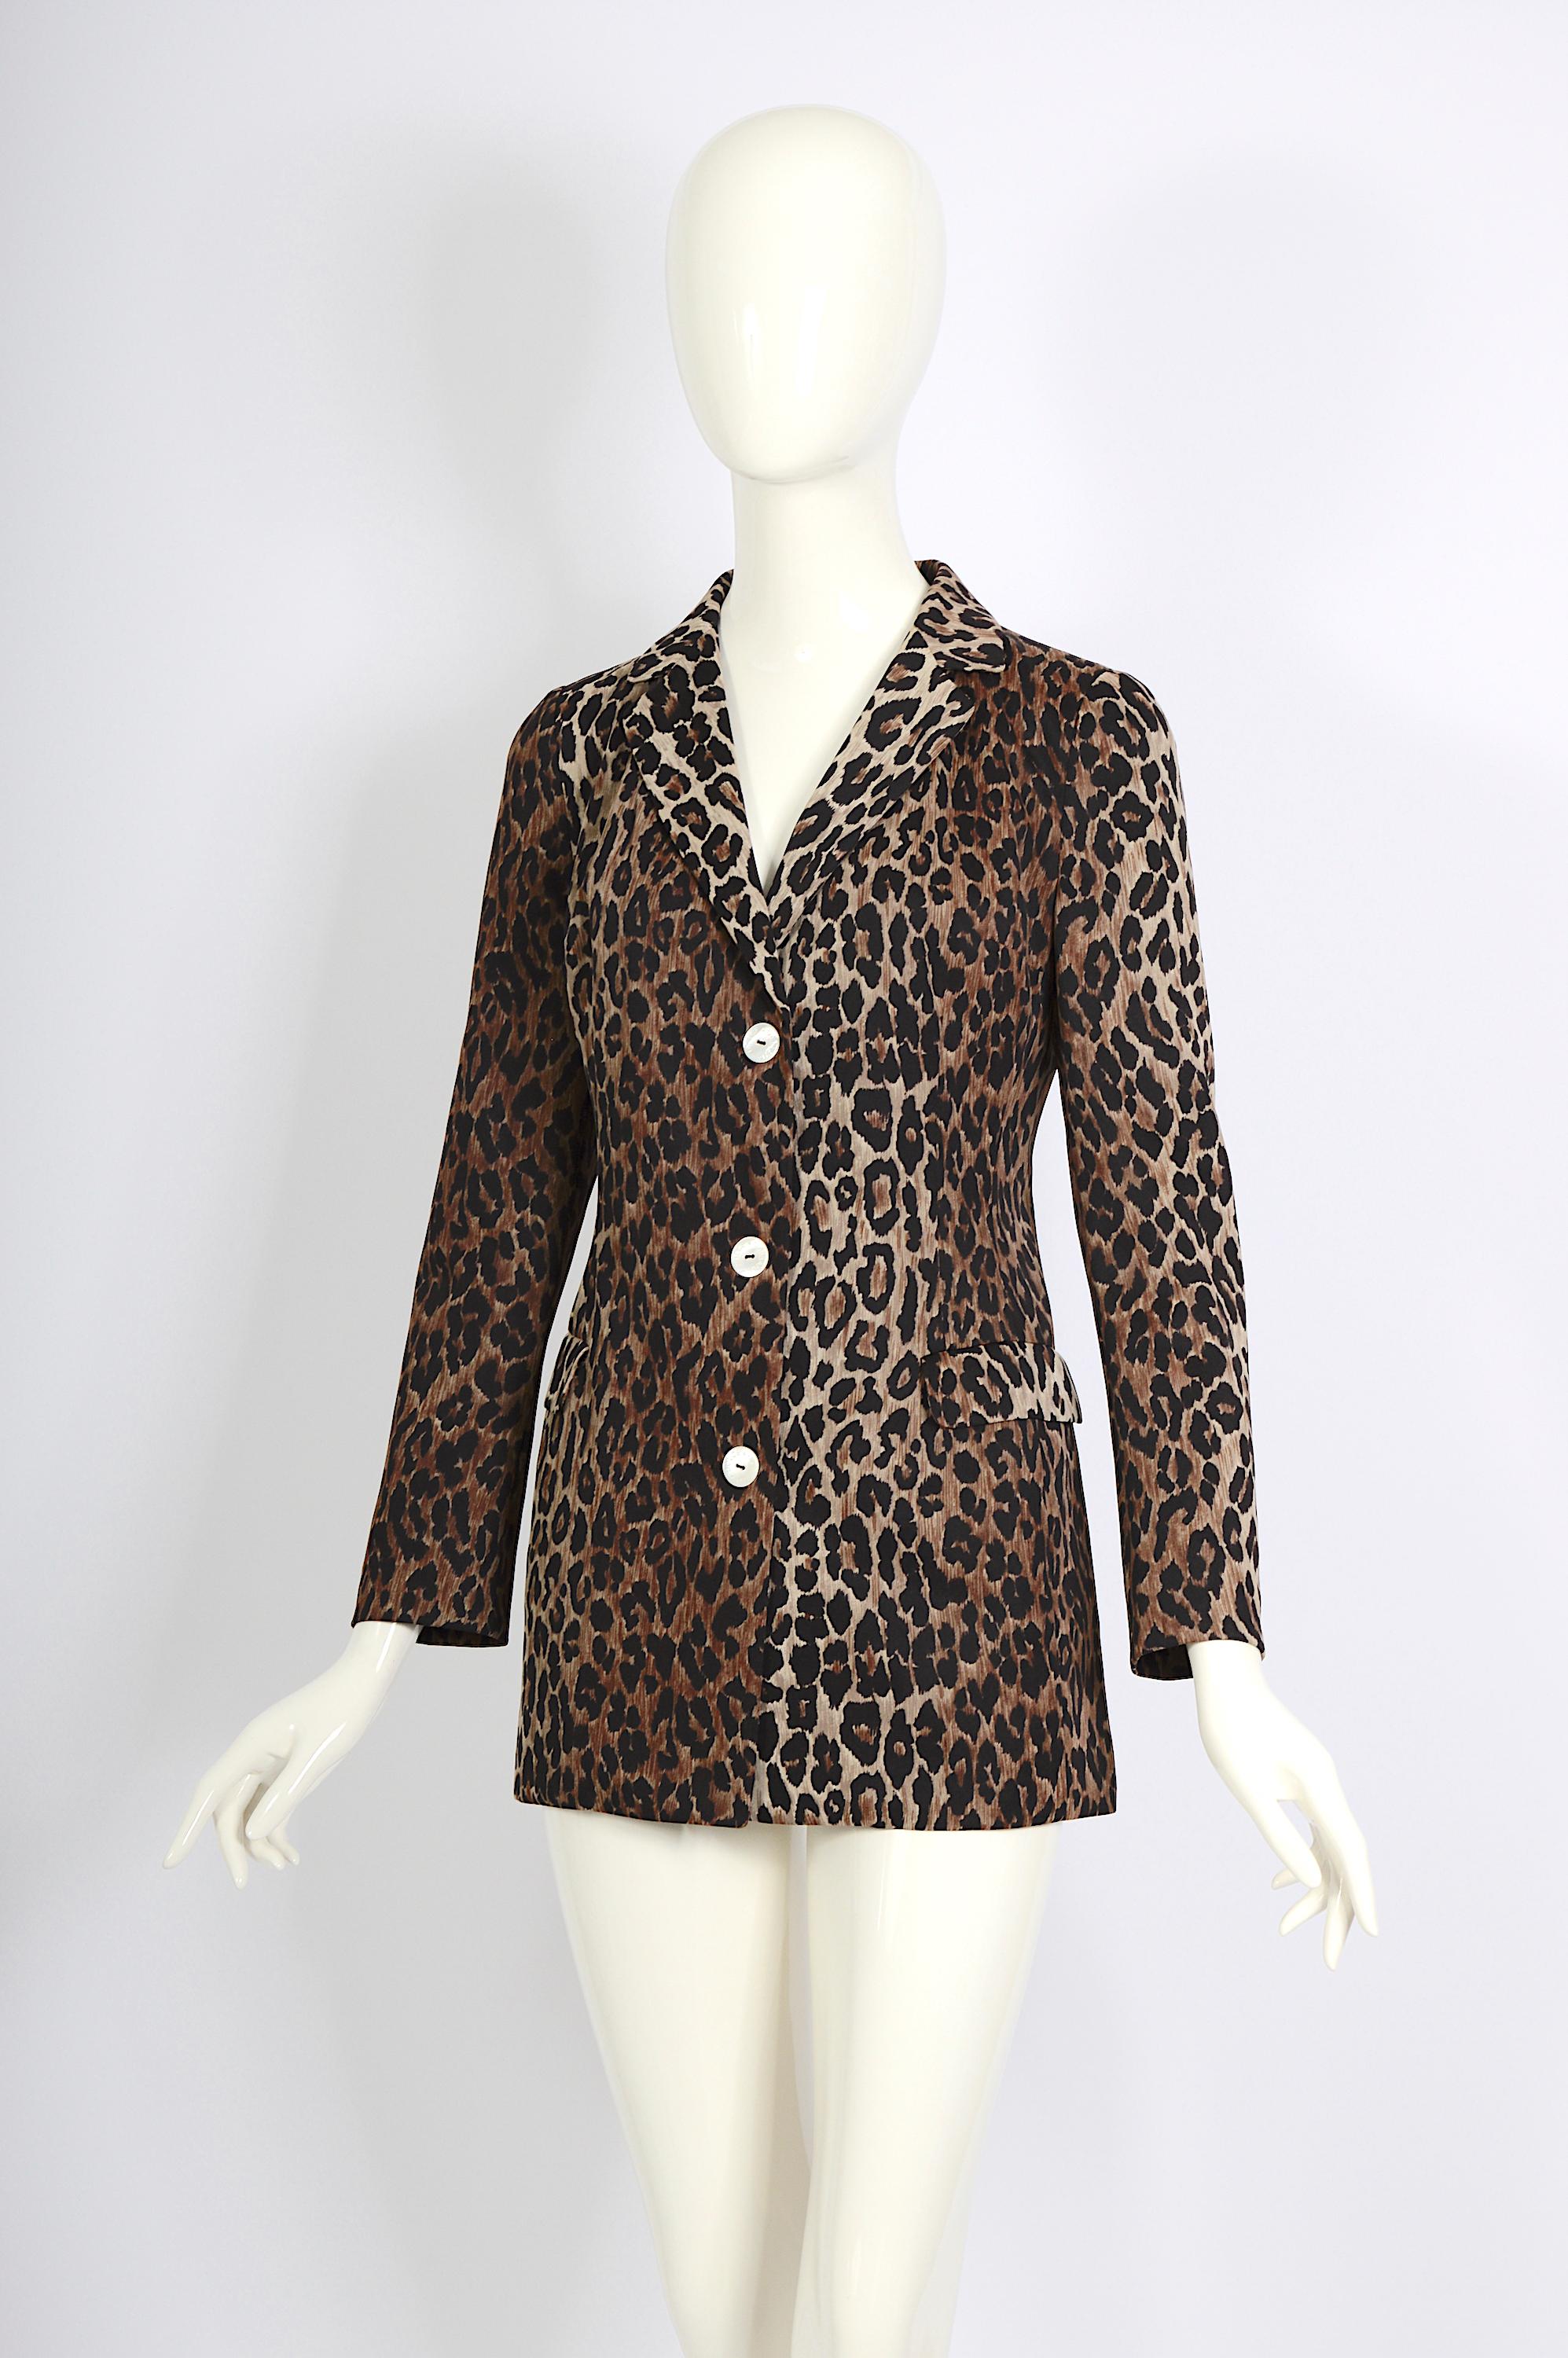 Dolce & Gabbana Leopard Jacket, as seen on the Spring/Summer 1997 runway.
The jacket is made of nylon and it has the branded branded Dolce & Gabbana buttons. This exquisite piece is fully lined with the Dolce & Gabbana iconic leopard print.
It's a